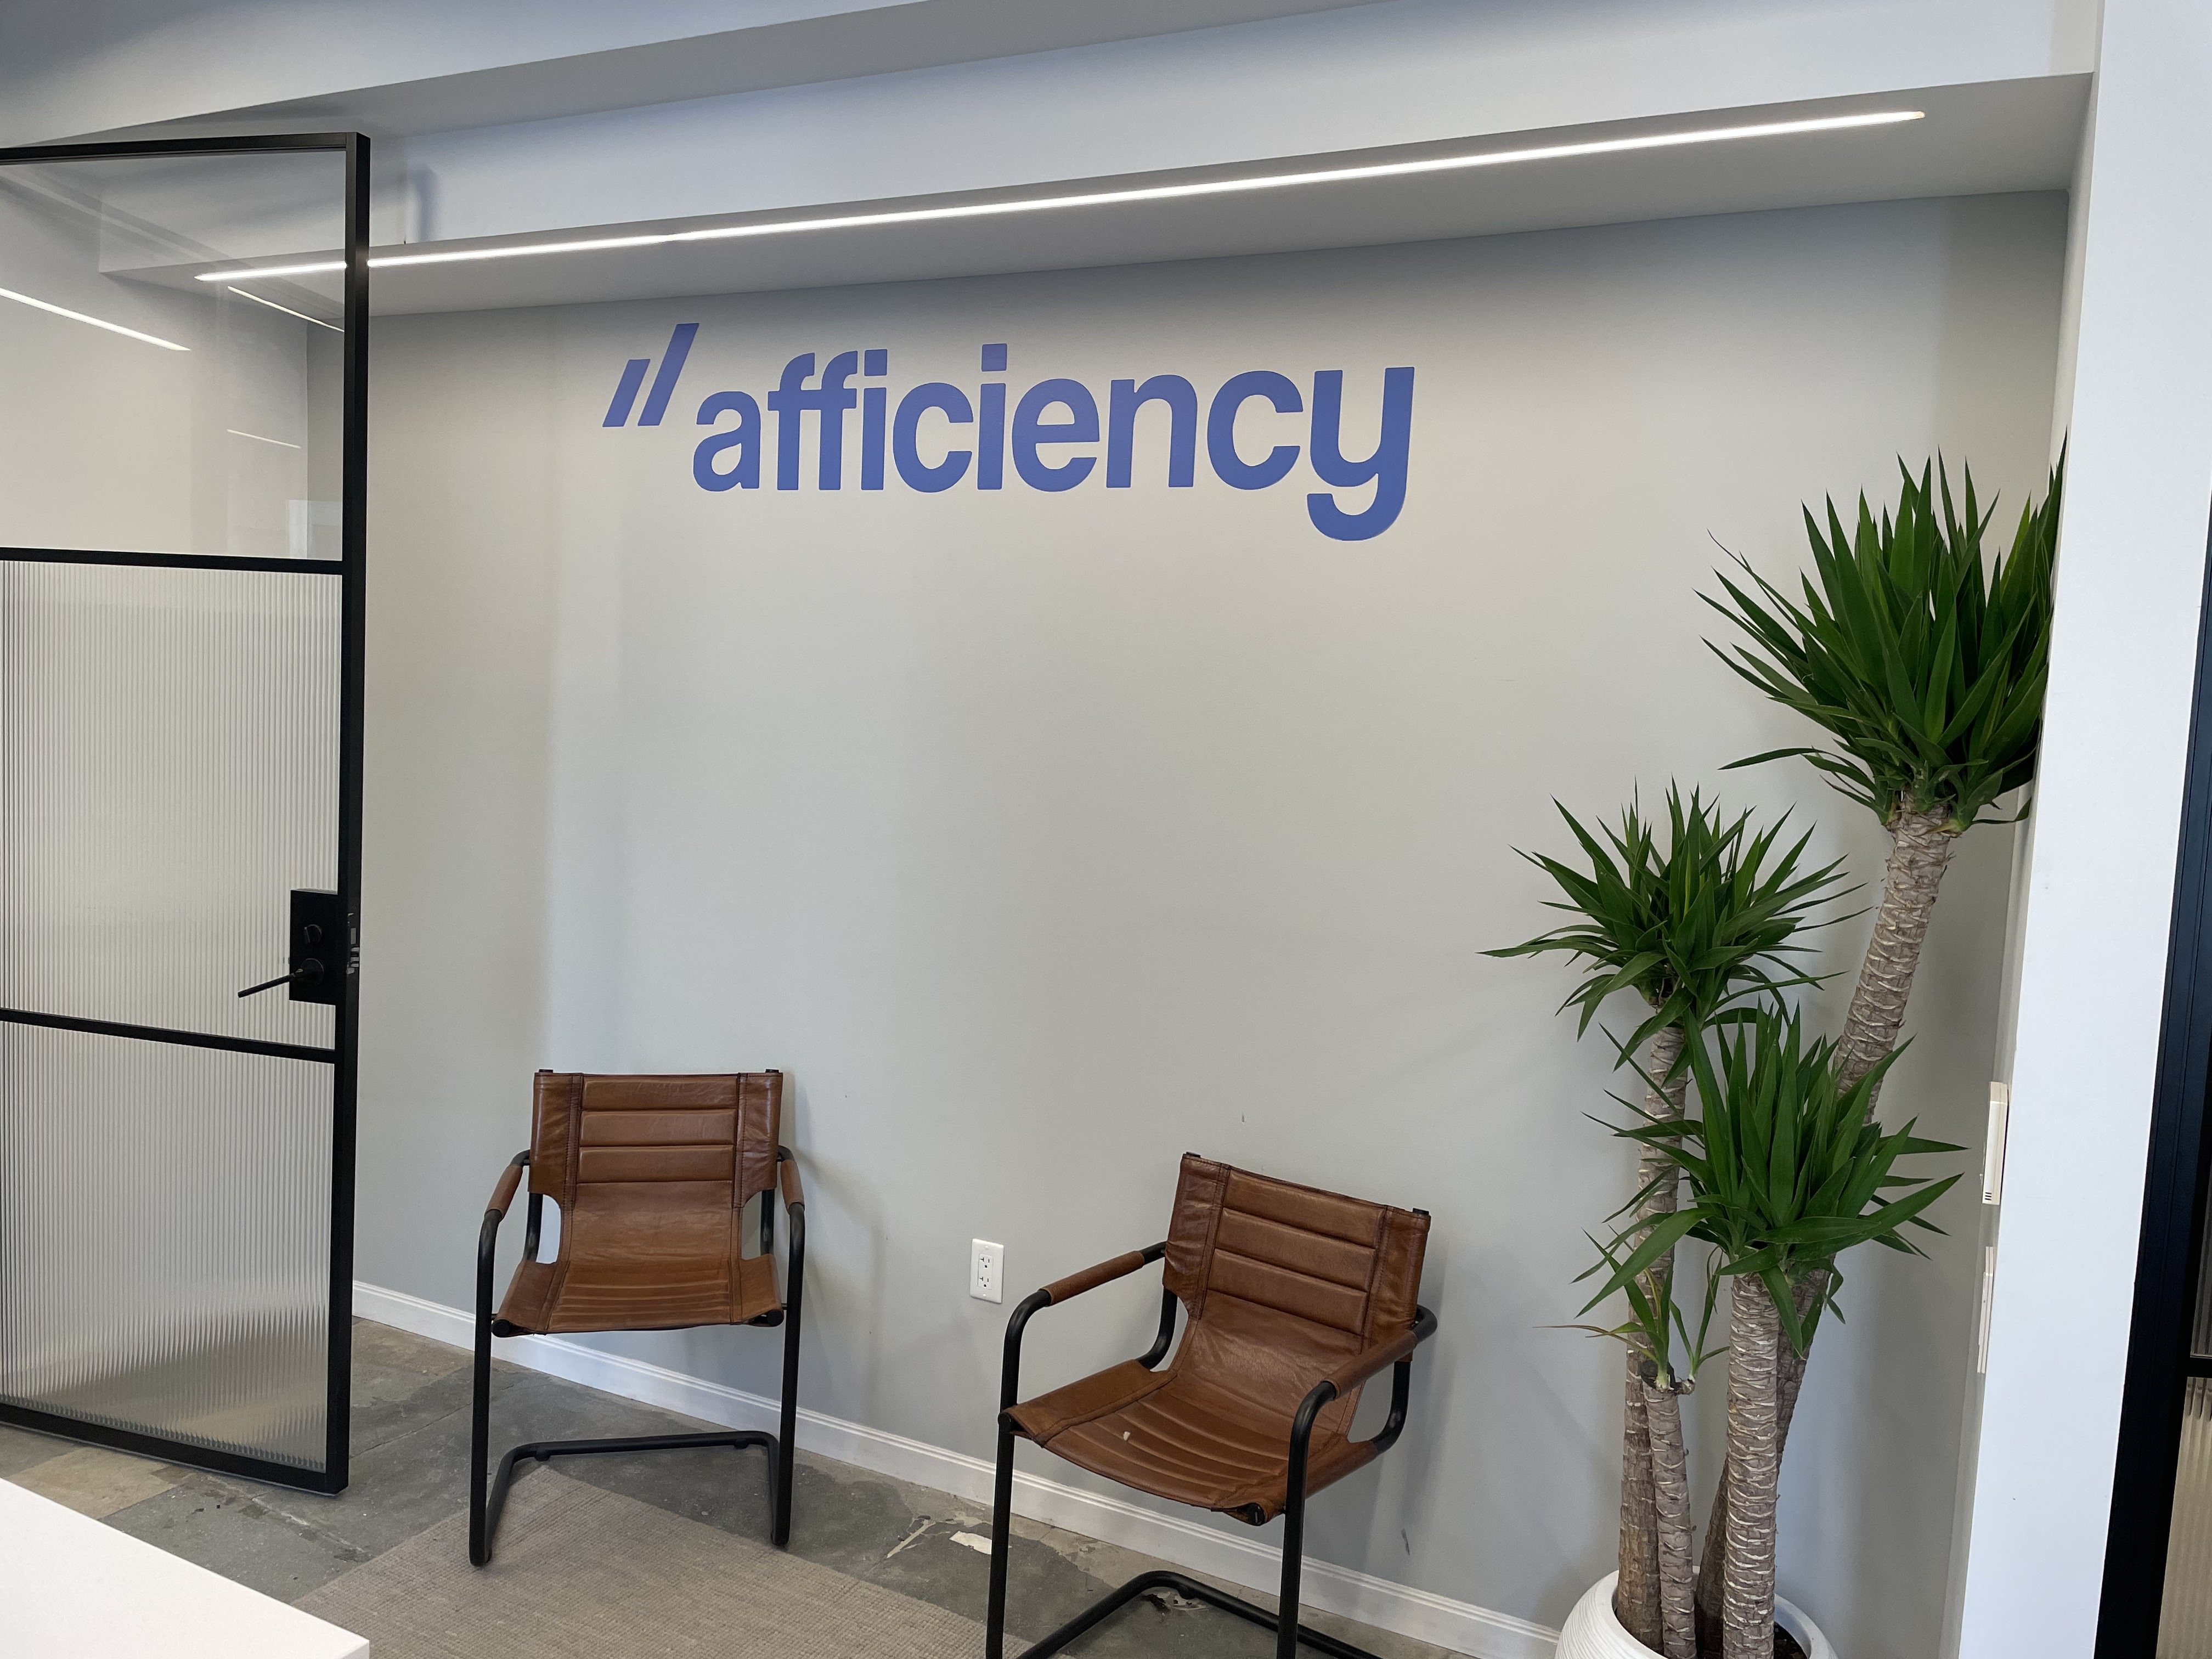 Afficiency, Thursday, July 7, 2022, Press release picture